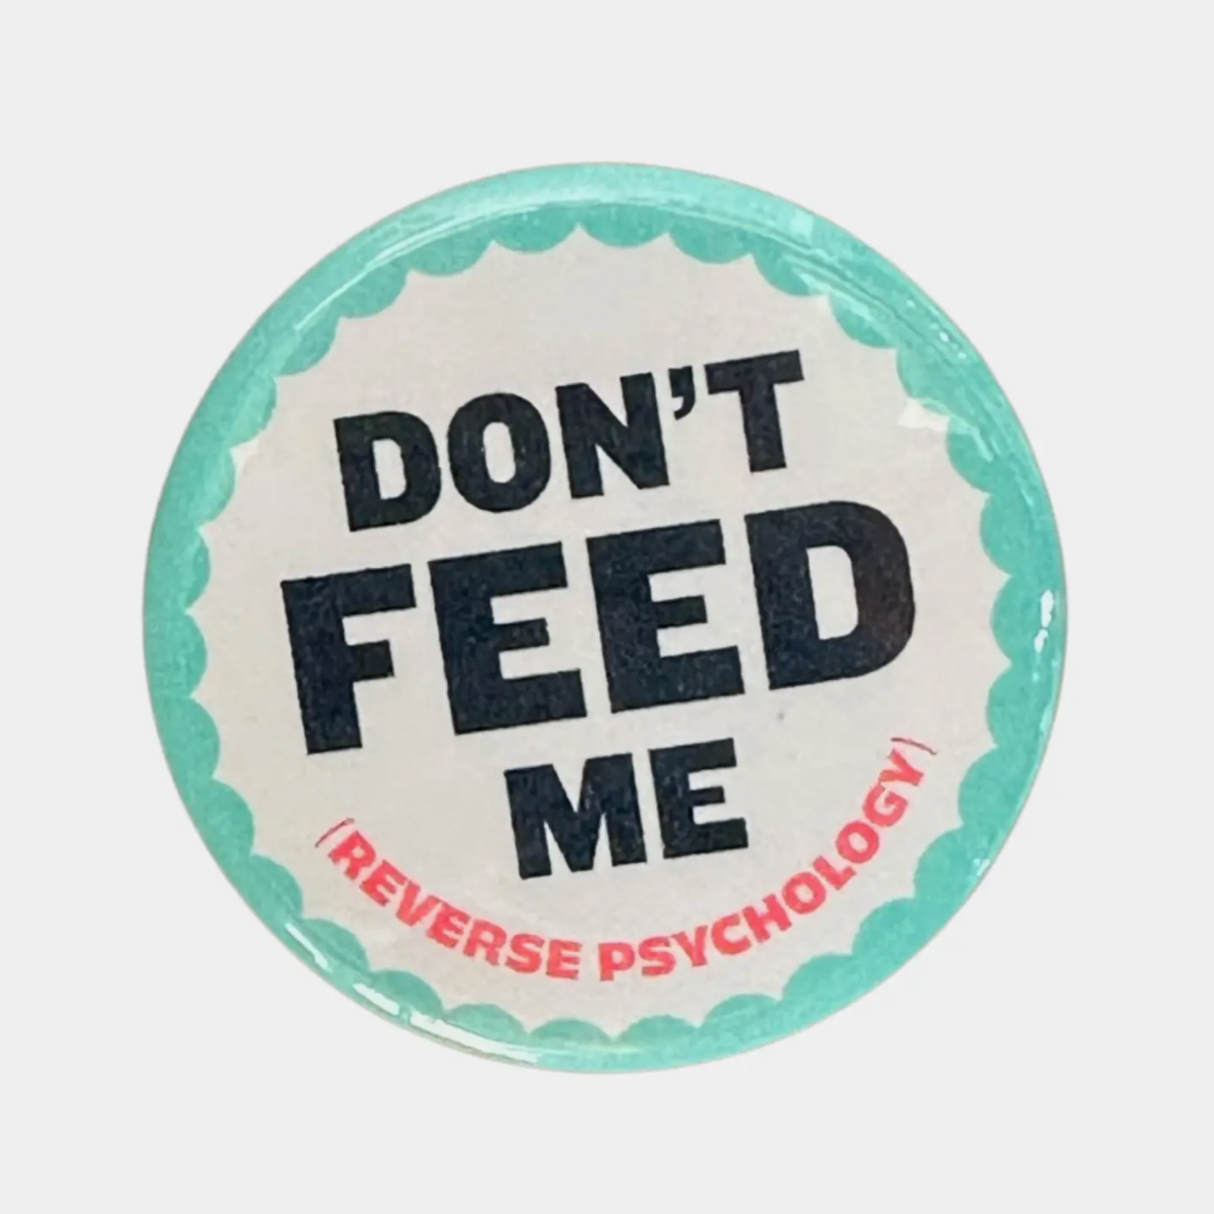 Don't Feed Me (Reverse Psychology) Button - 1.75"